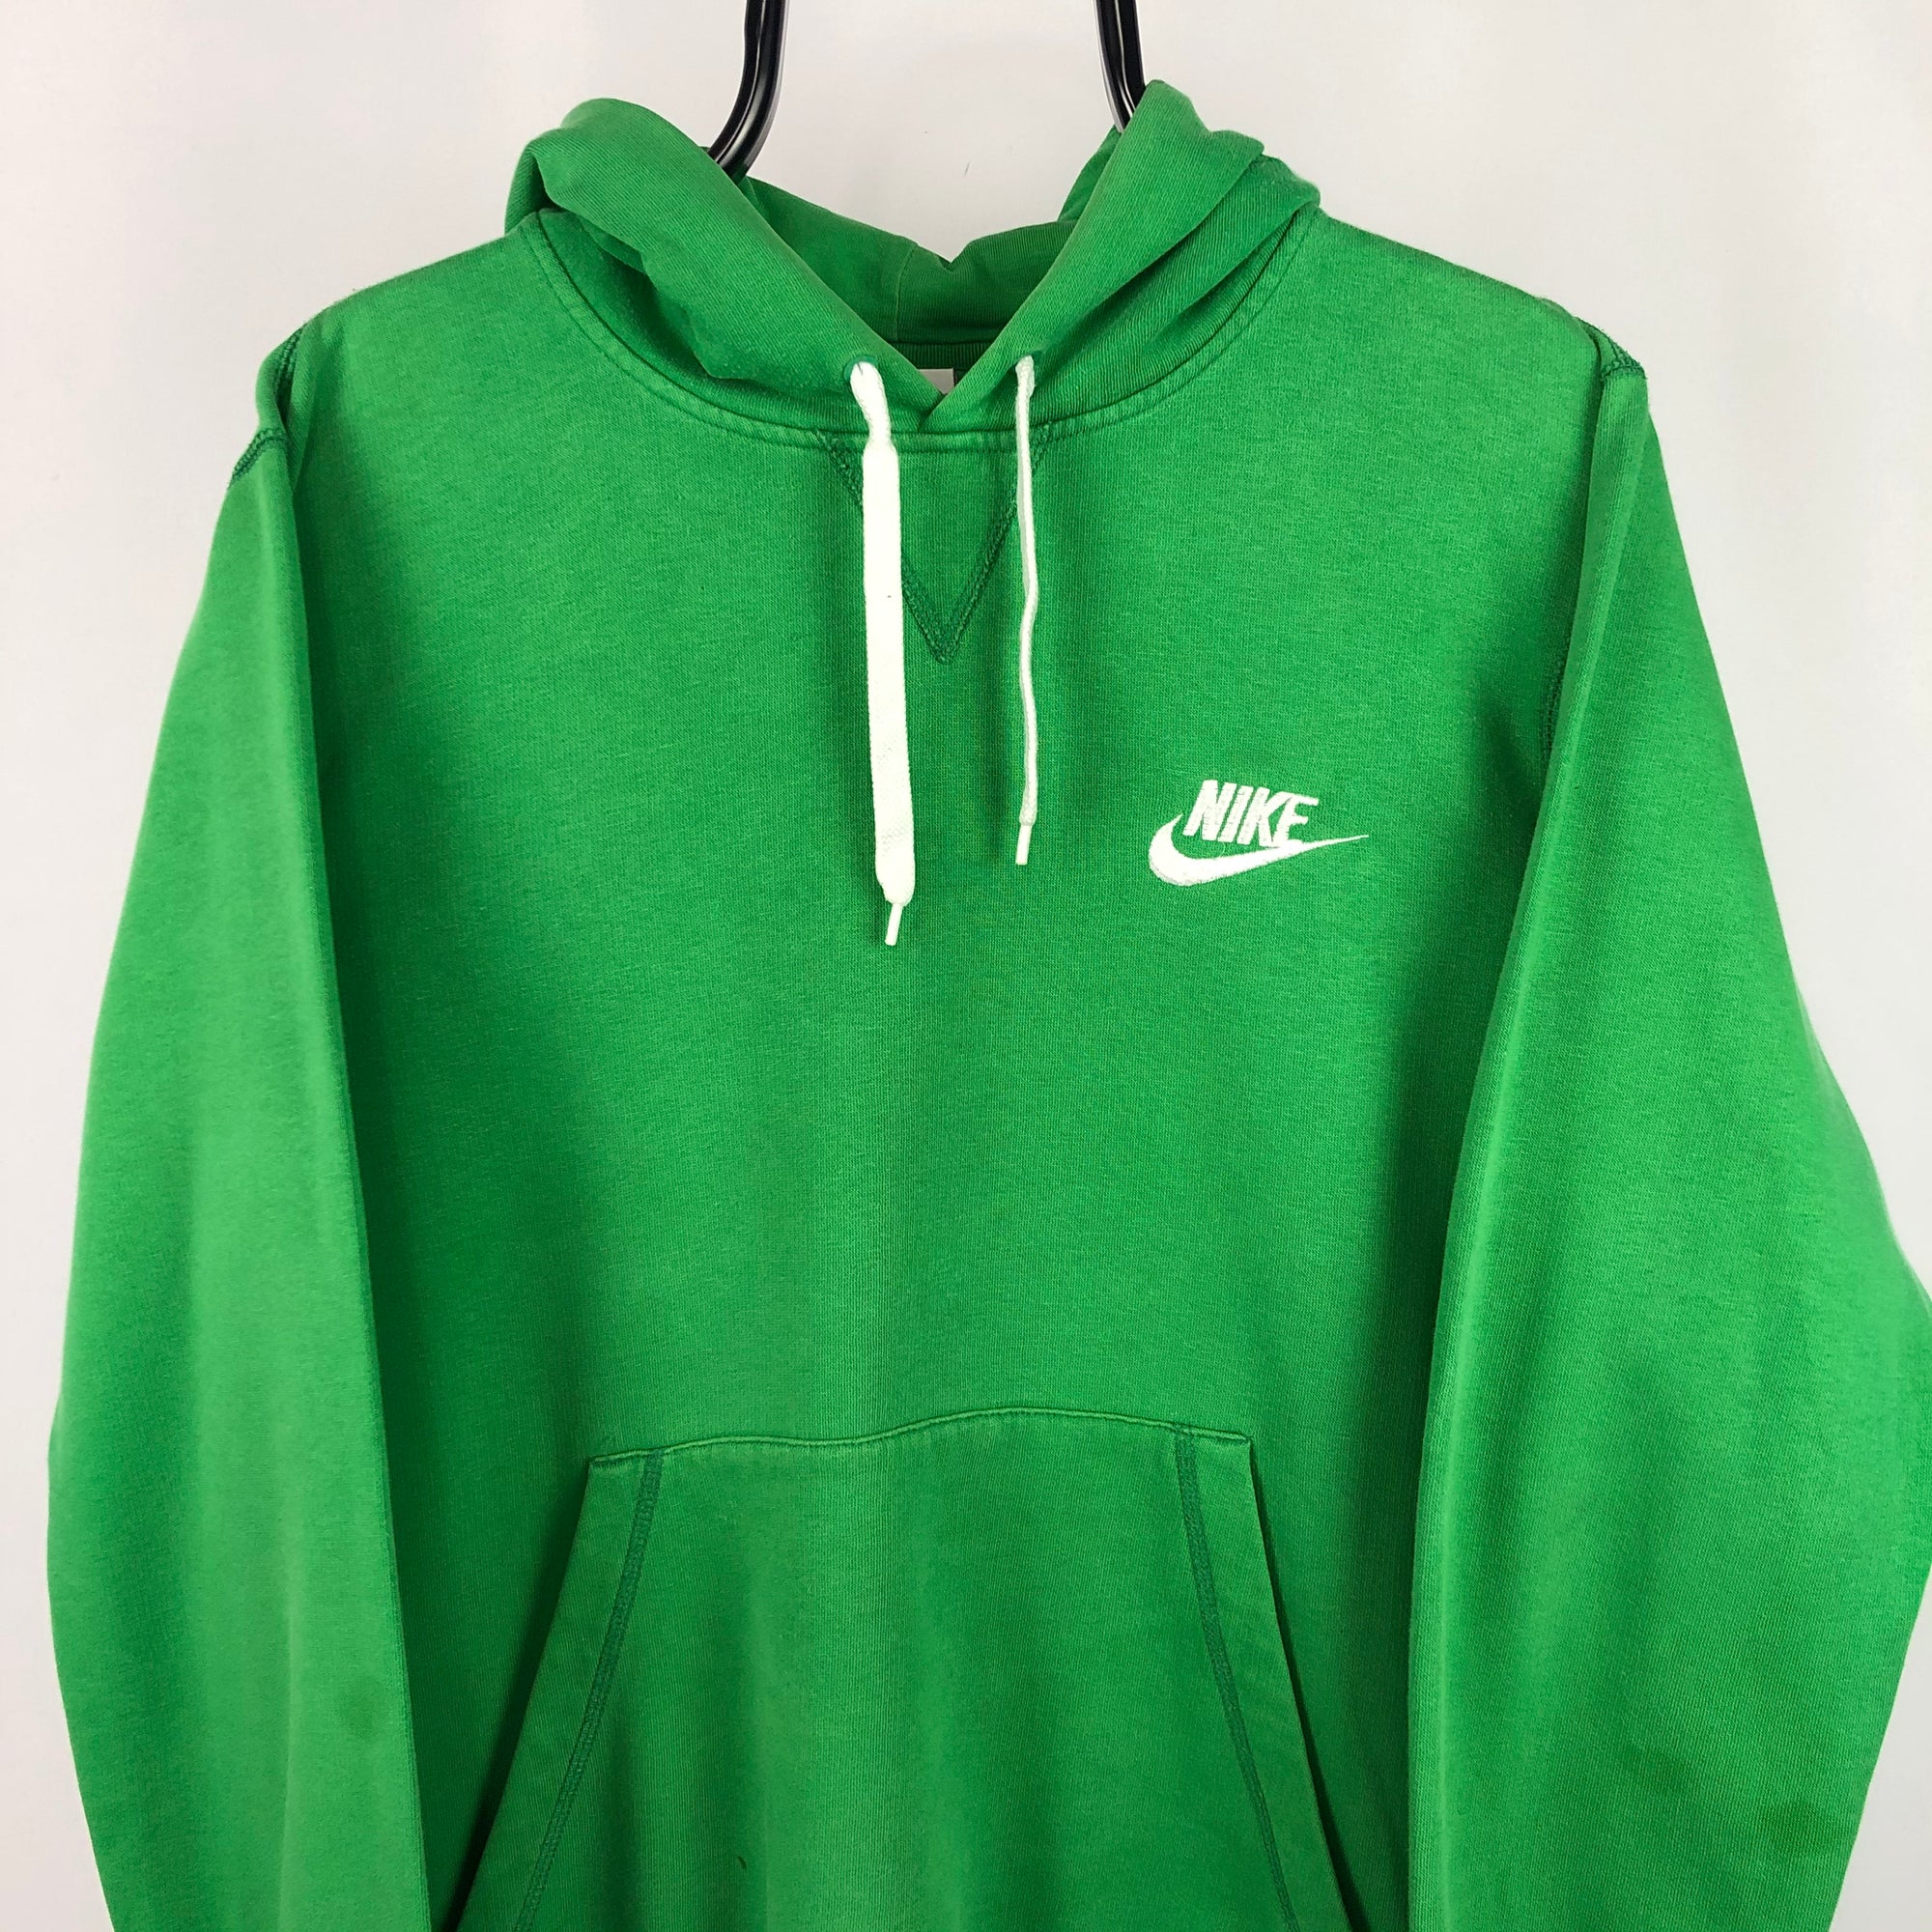 Vintage Nike Embroidered Small Logo Hoodie in Green - Men's Medium/Women's Large